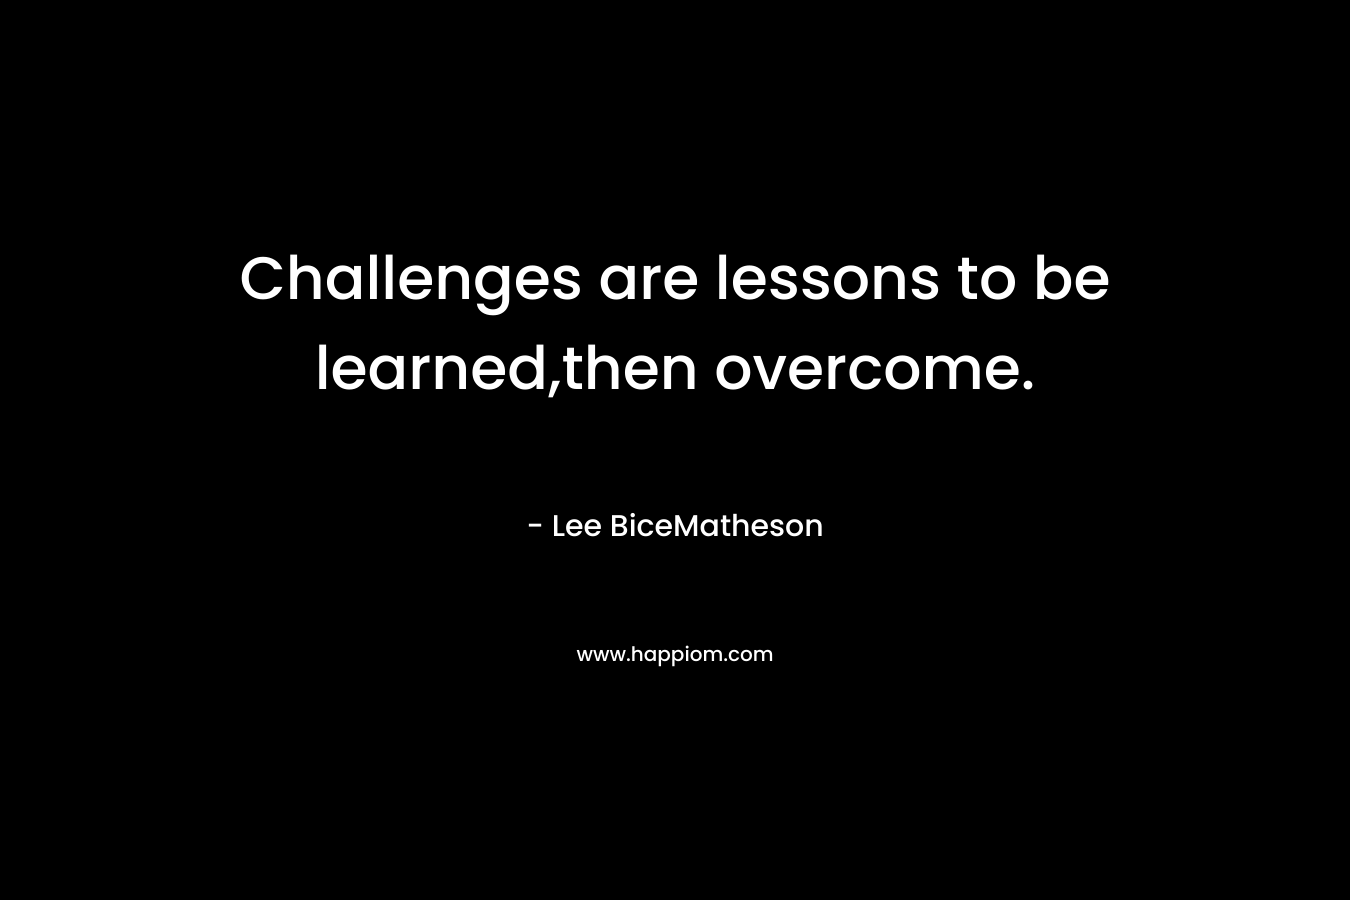 Challenges are lessons to be learned,then overcome. – Lee BiceMatheson